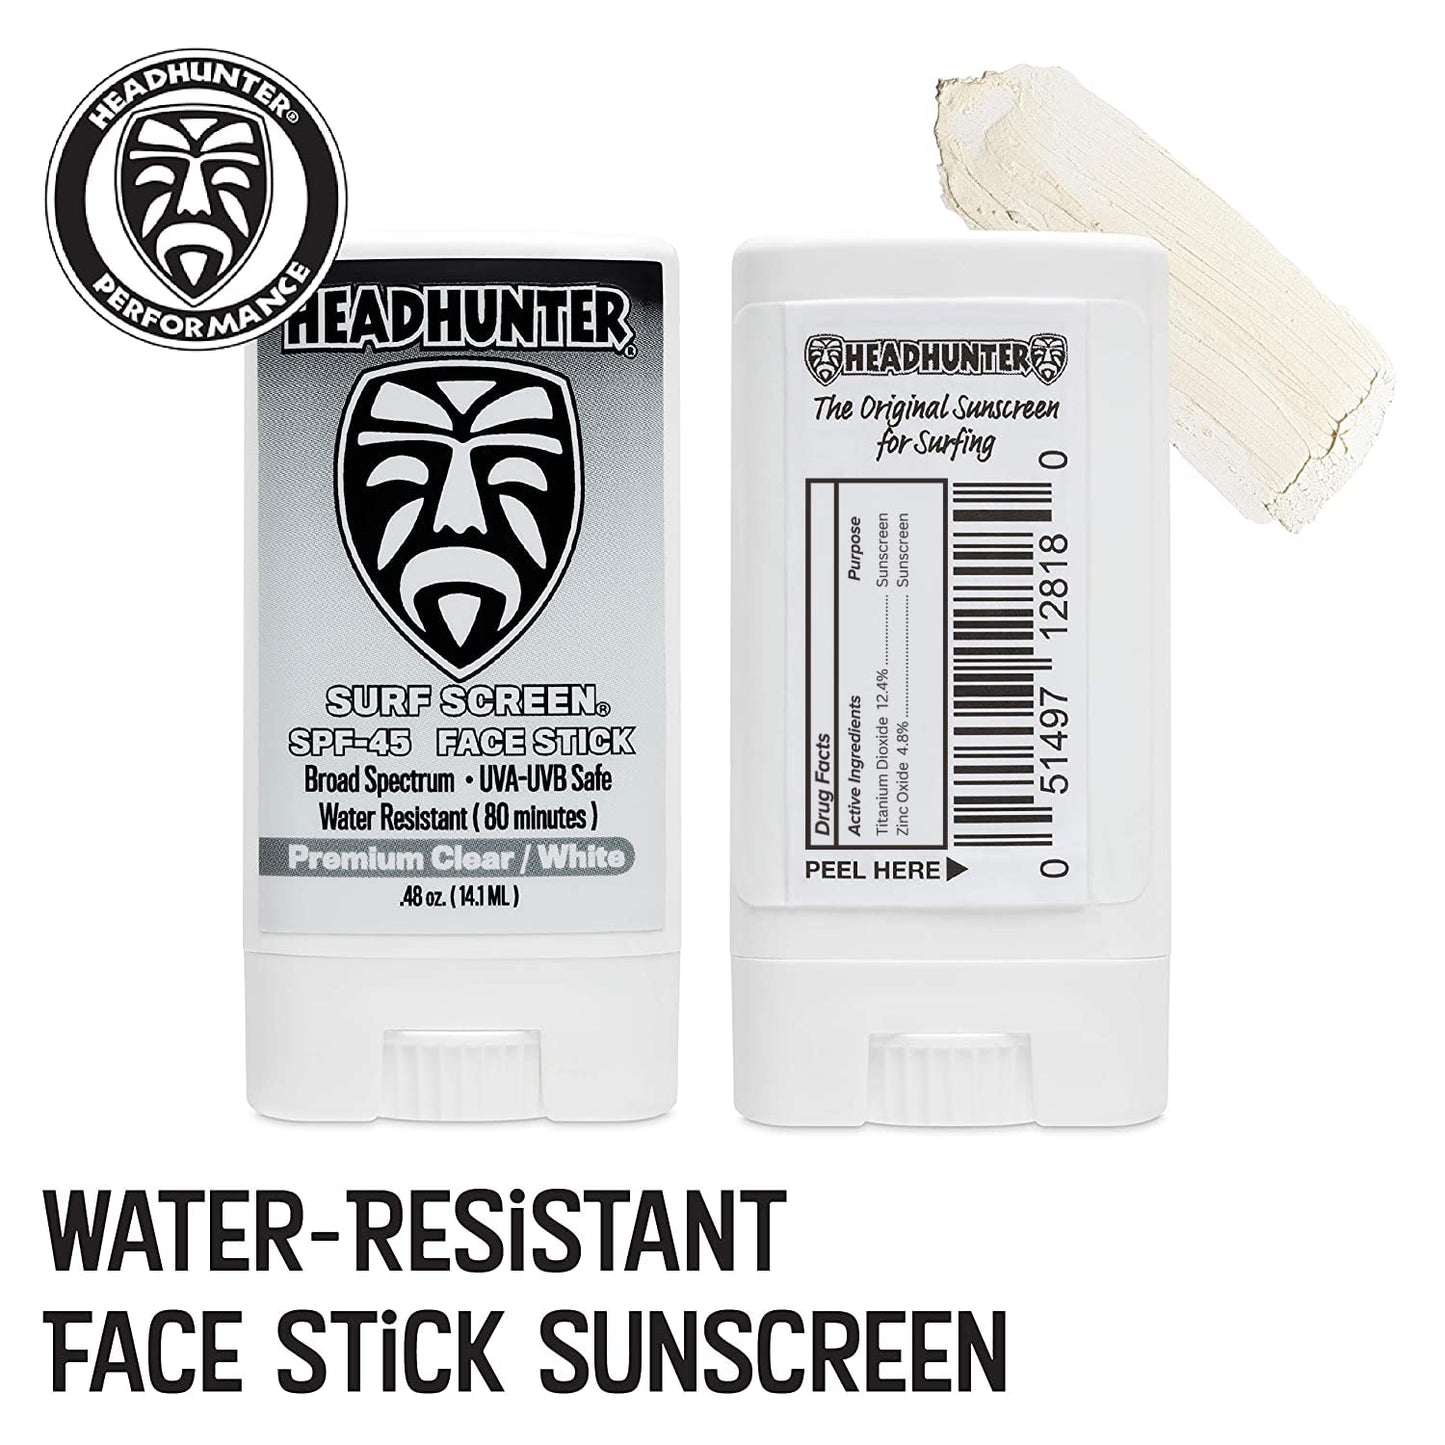 SPF 45 Mineral Sunscreen Face Stick – Clear / White  (HWT) - 2 PACK